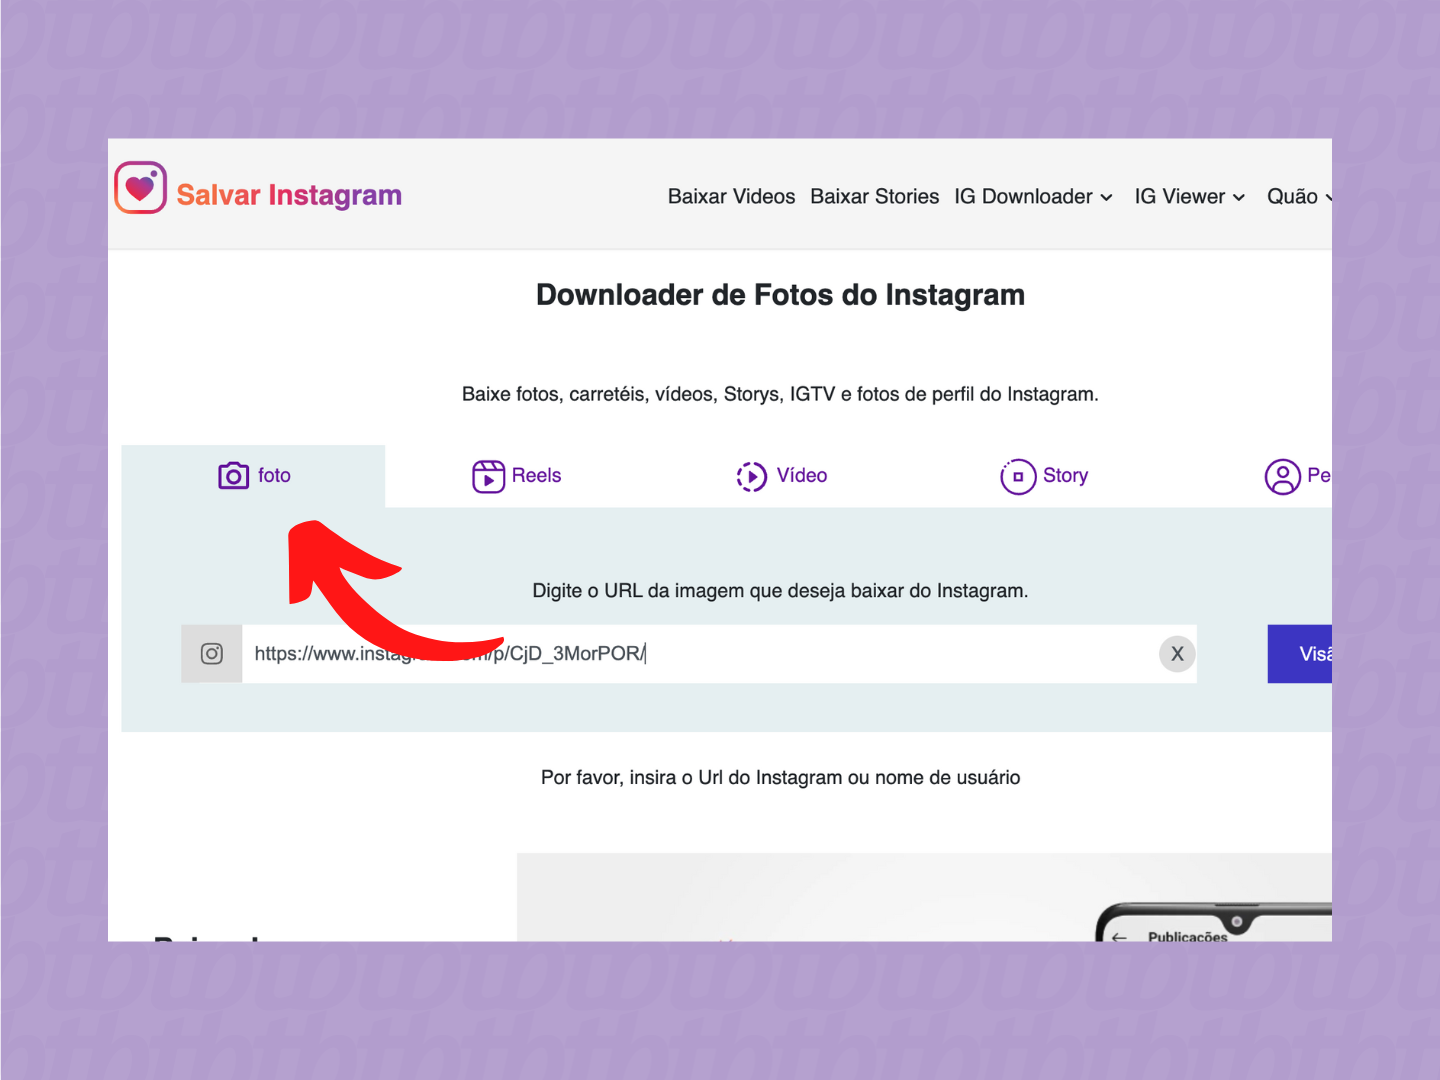 Access Save Instagram (Image: Reproduction/APK Games)